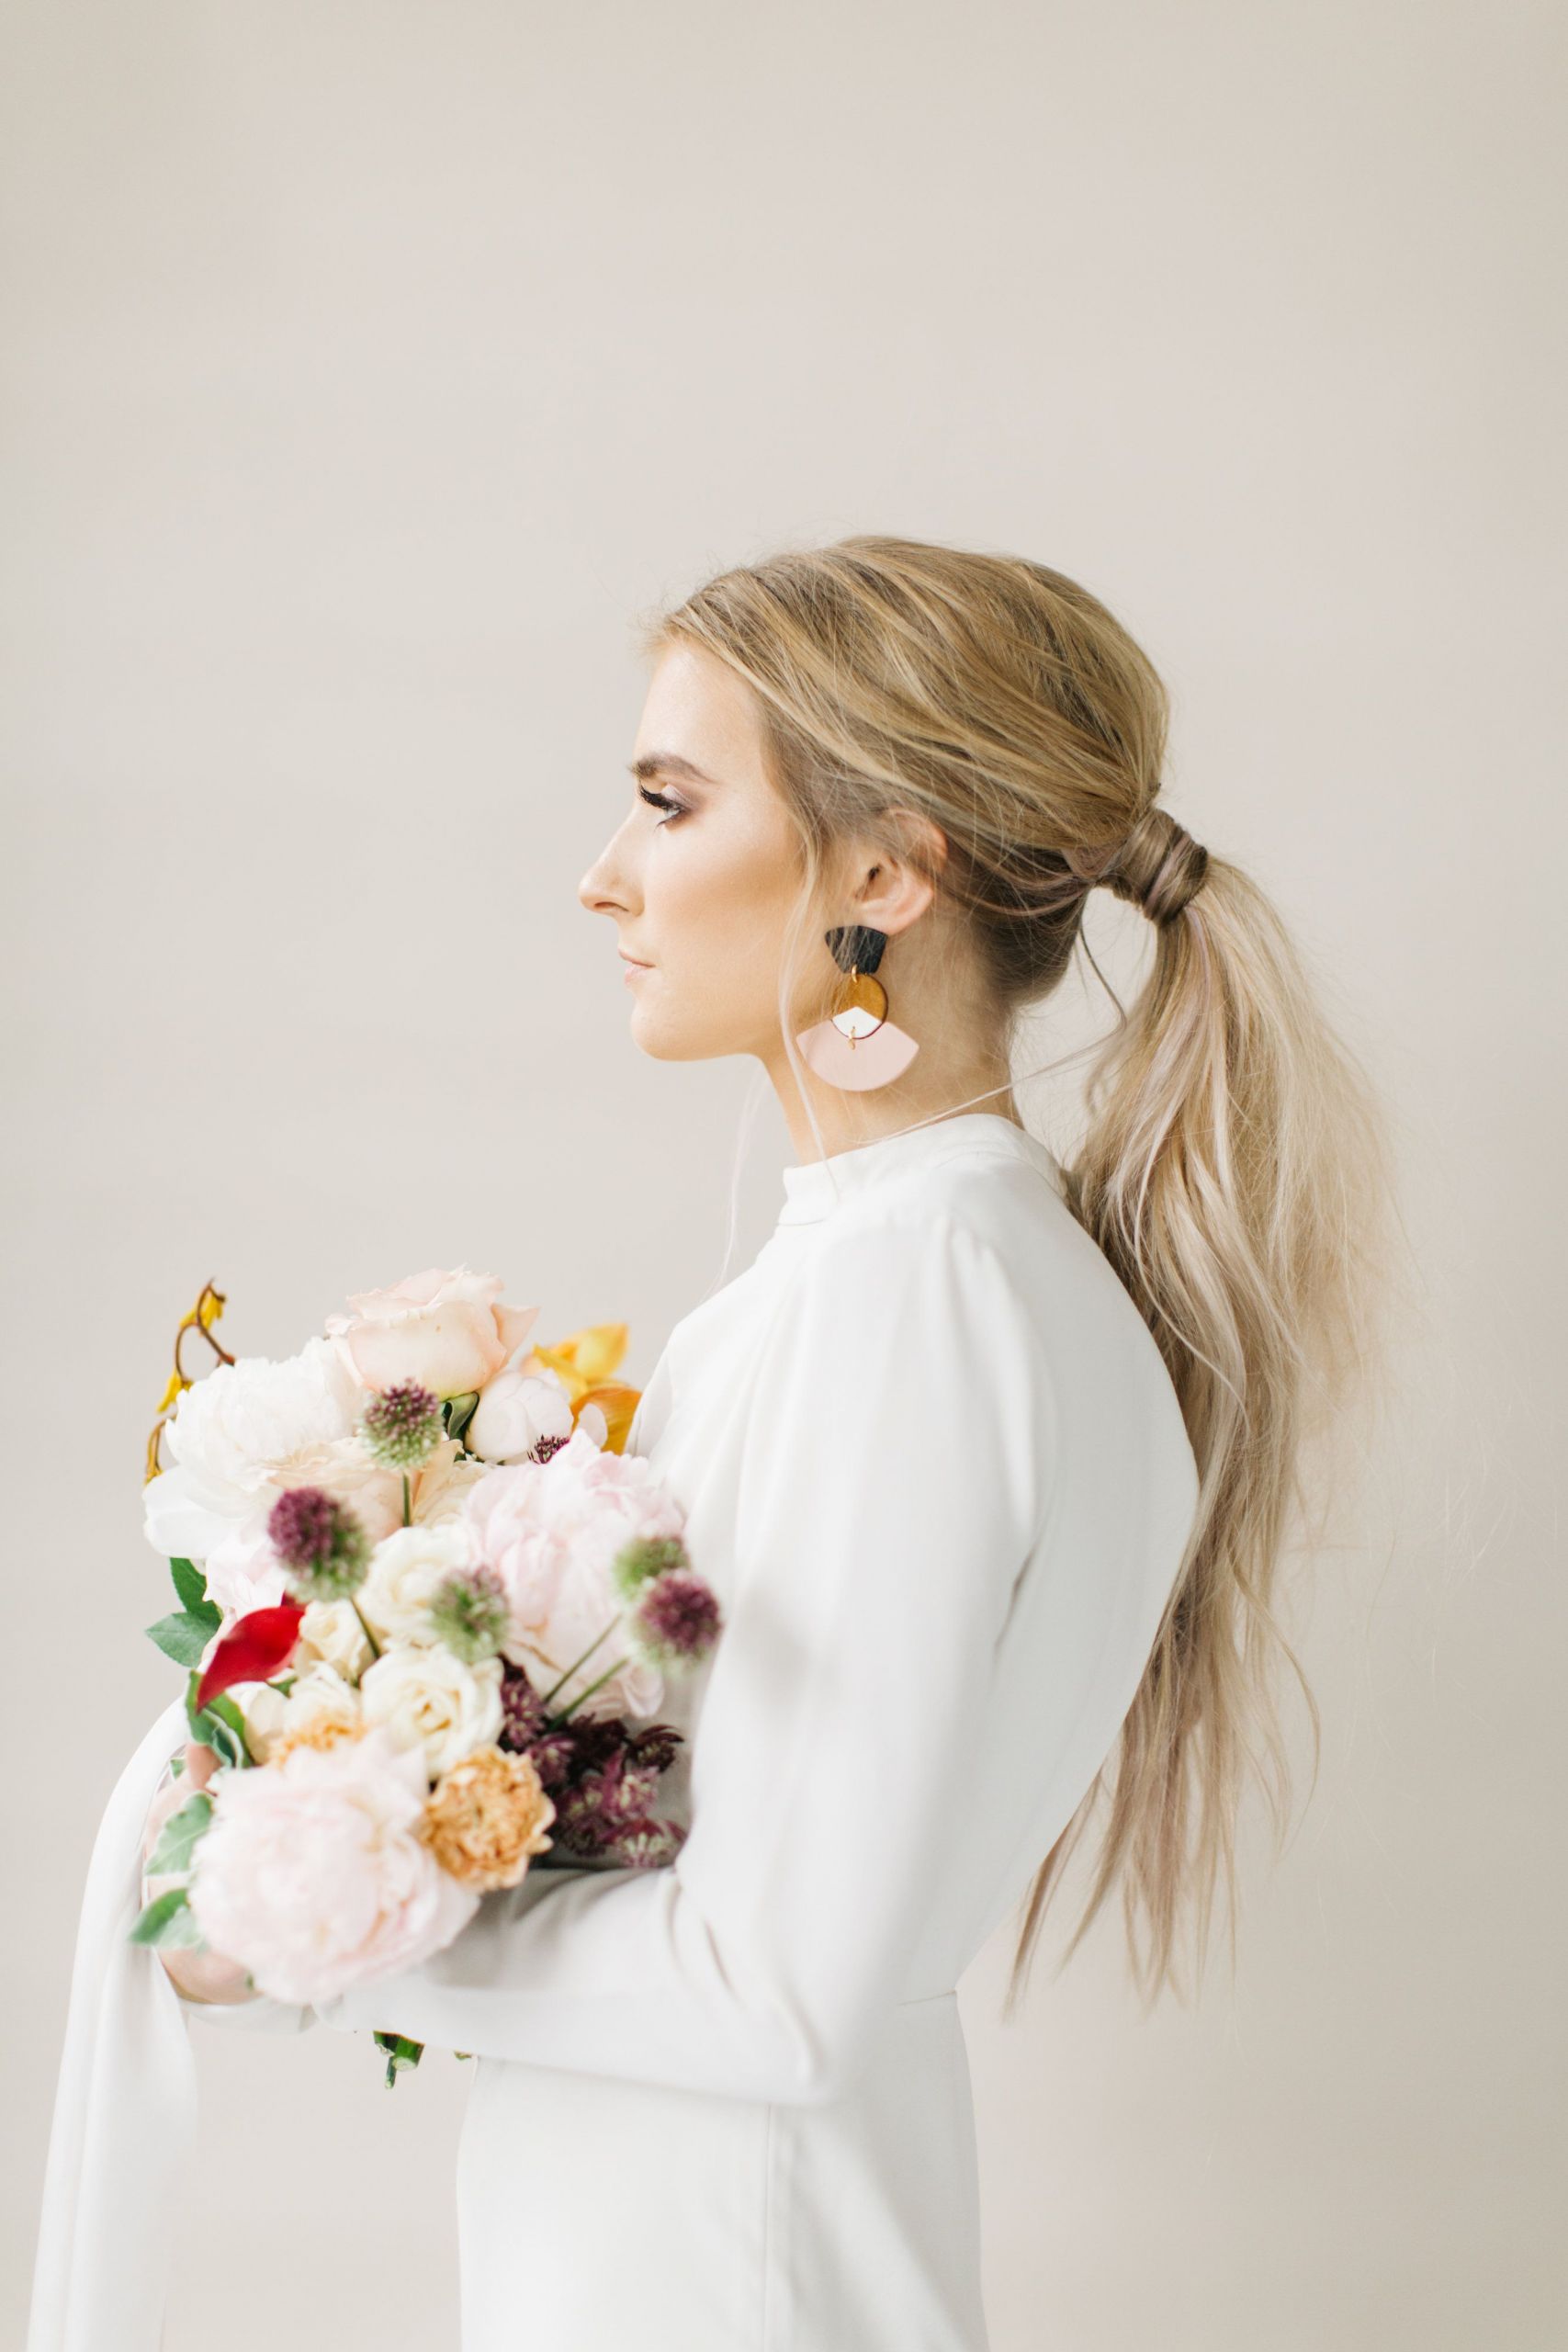 Wedding Ponytail Hairstyle
 Best Wedding Hairstyles With Headband Pony Tails Ideas